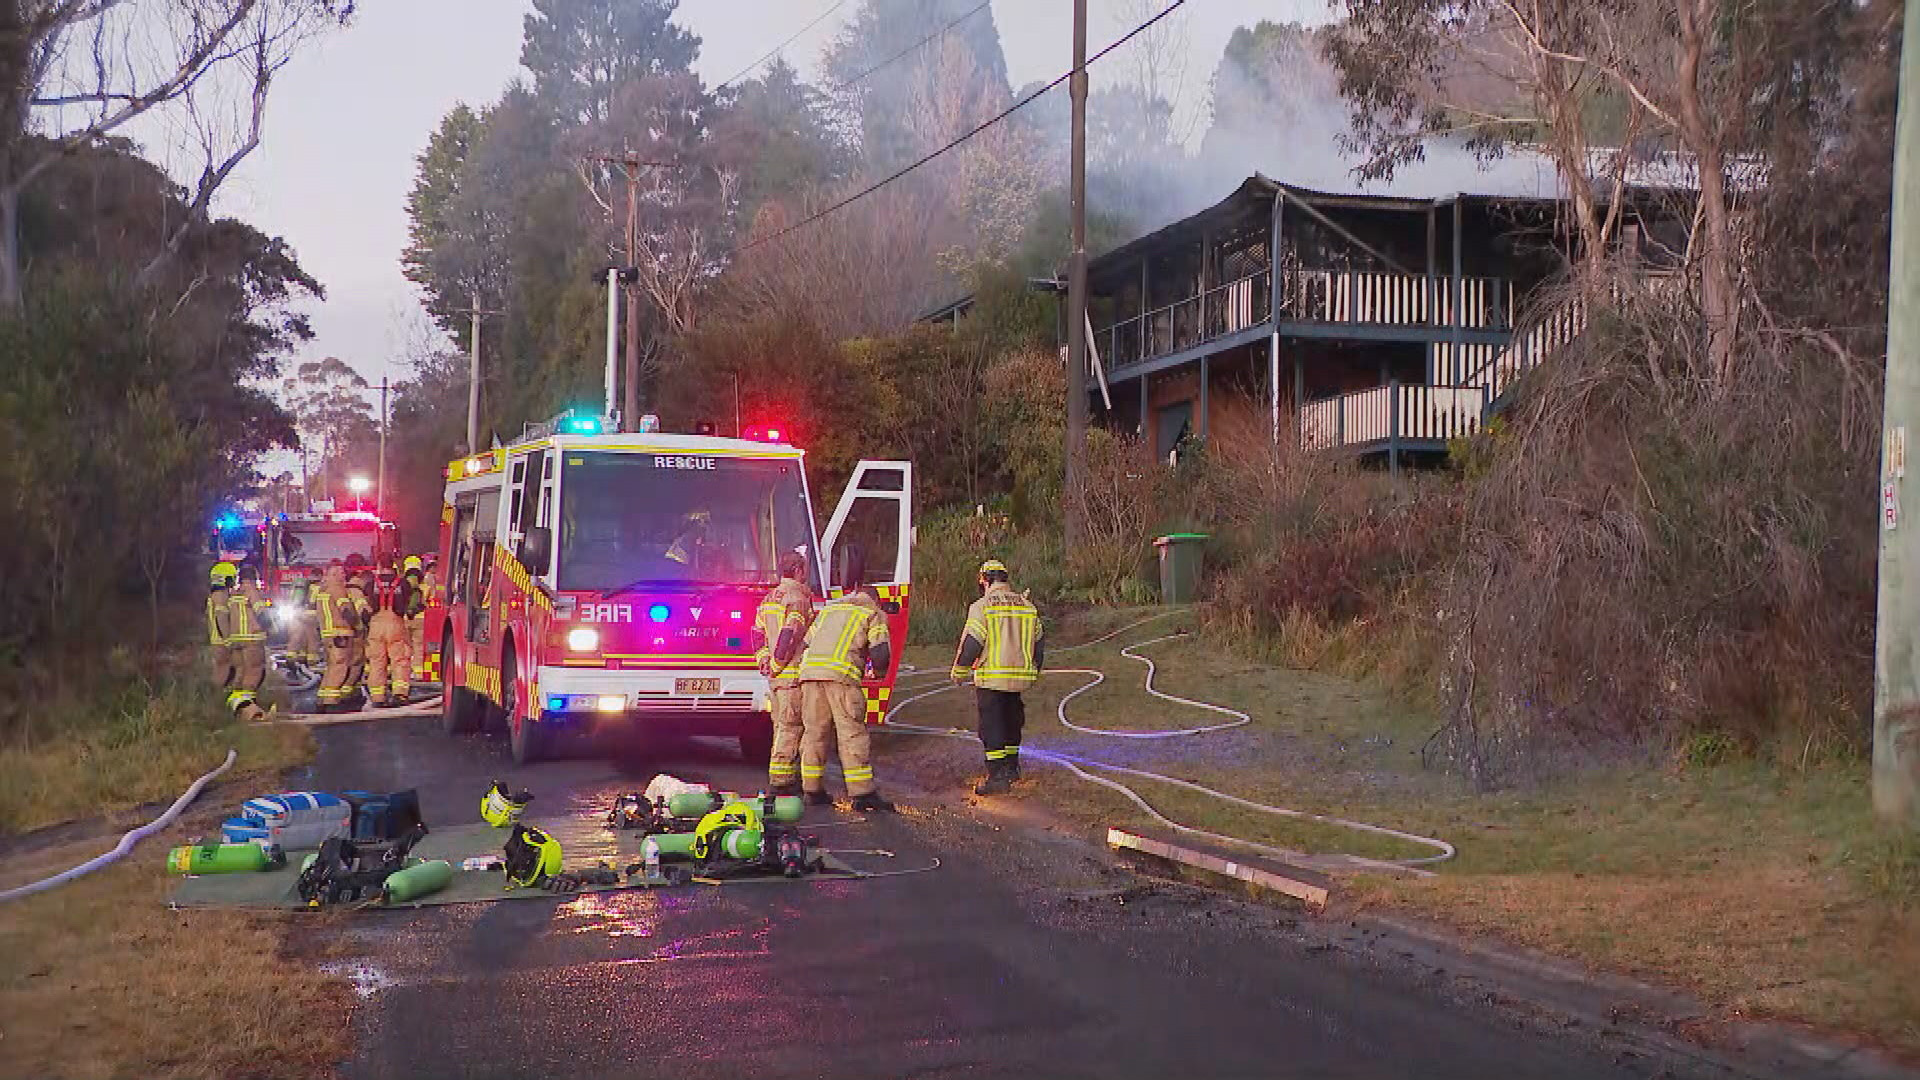 A man has died in a house fire in the Blue Mountains, west of Sydney.